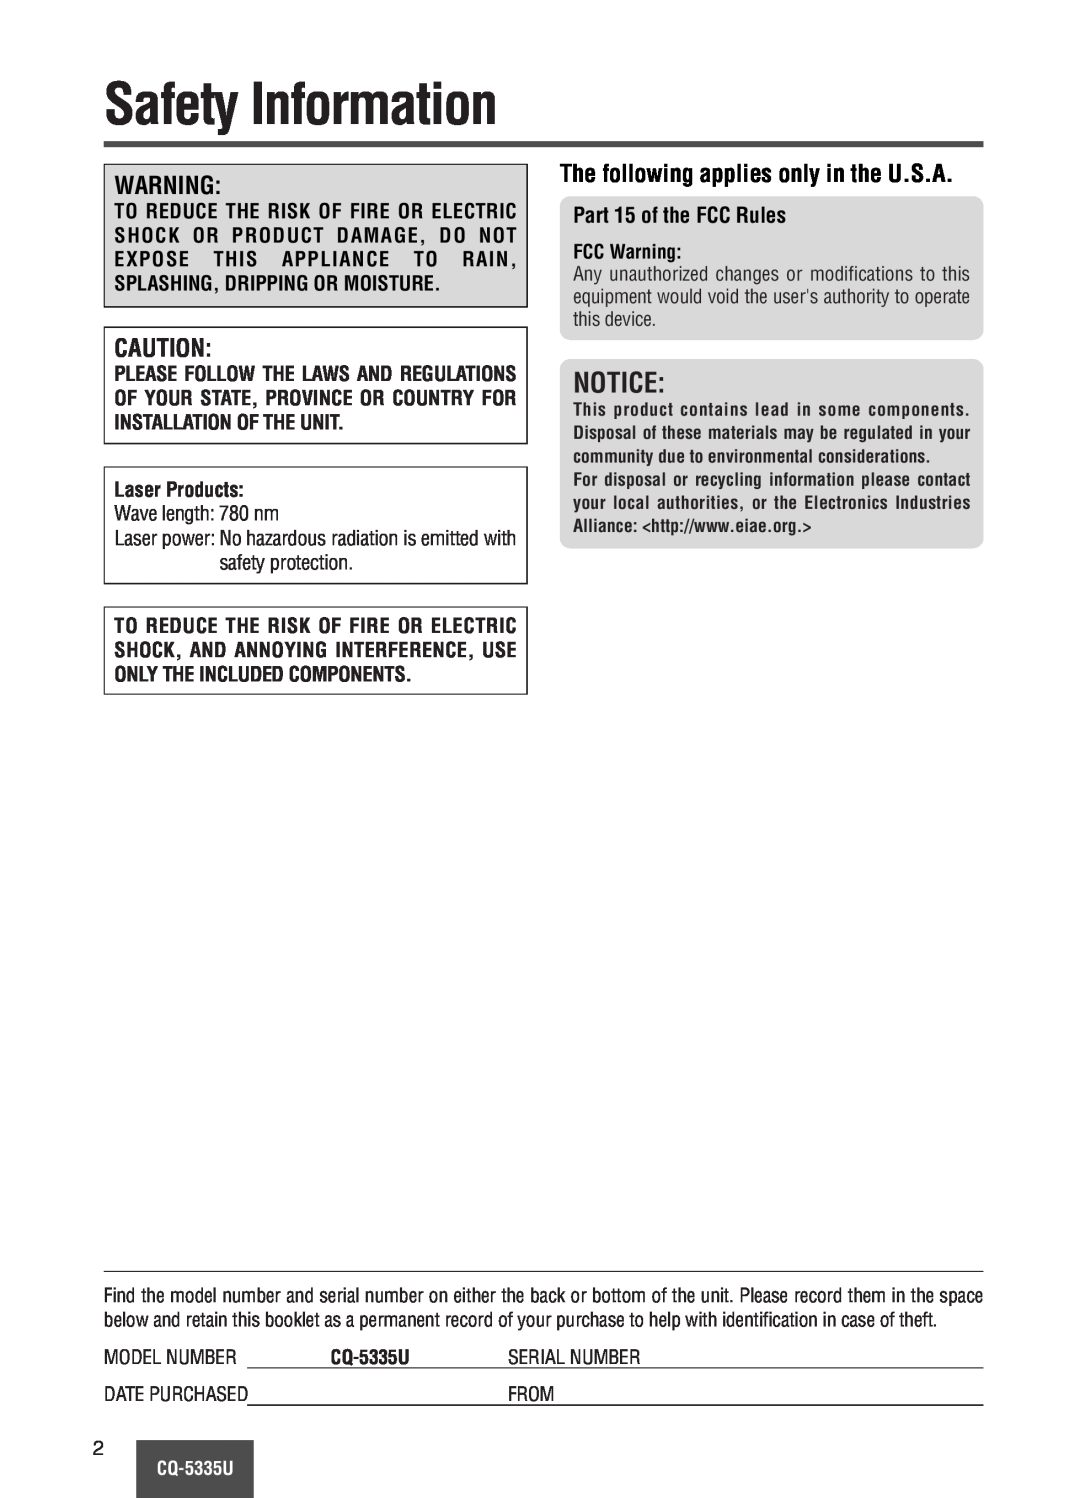 Panasonic CQ-5335U operating instructions Safety Information, The following applies only in the U.S.A, Serial Number 